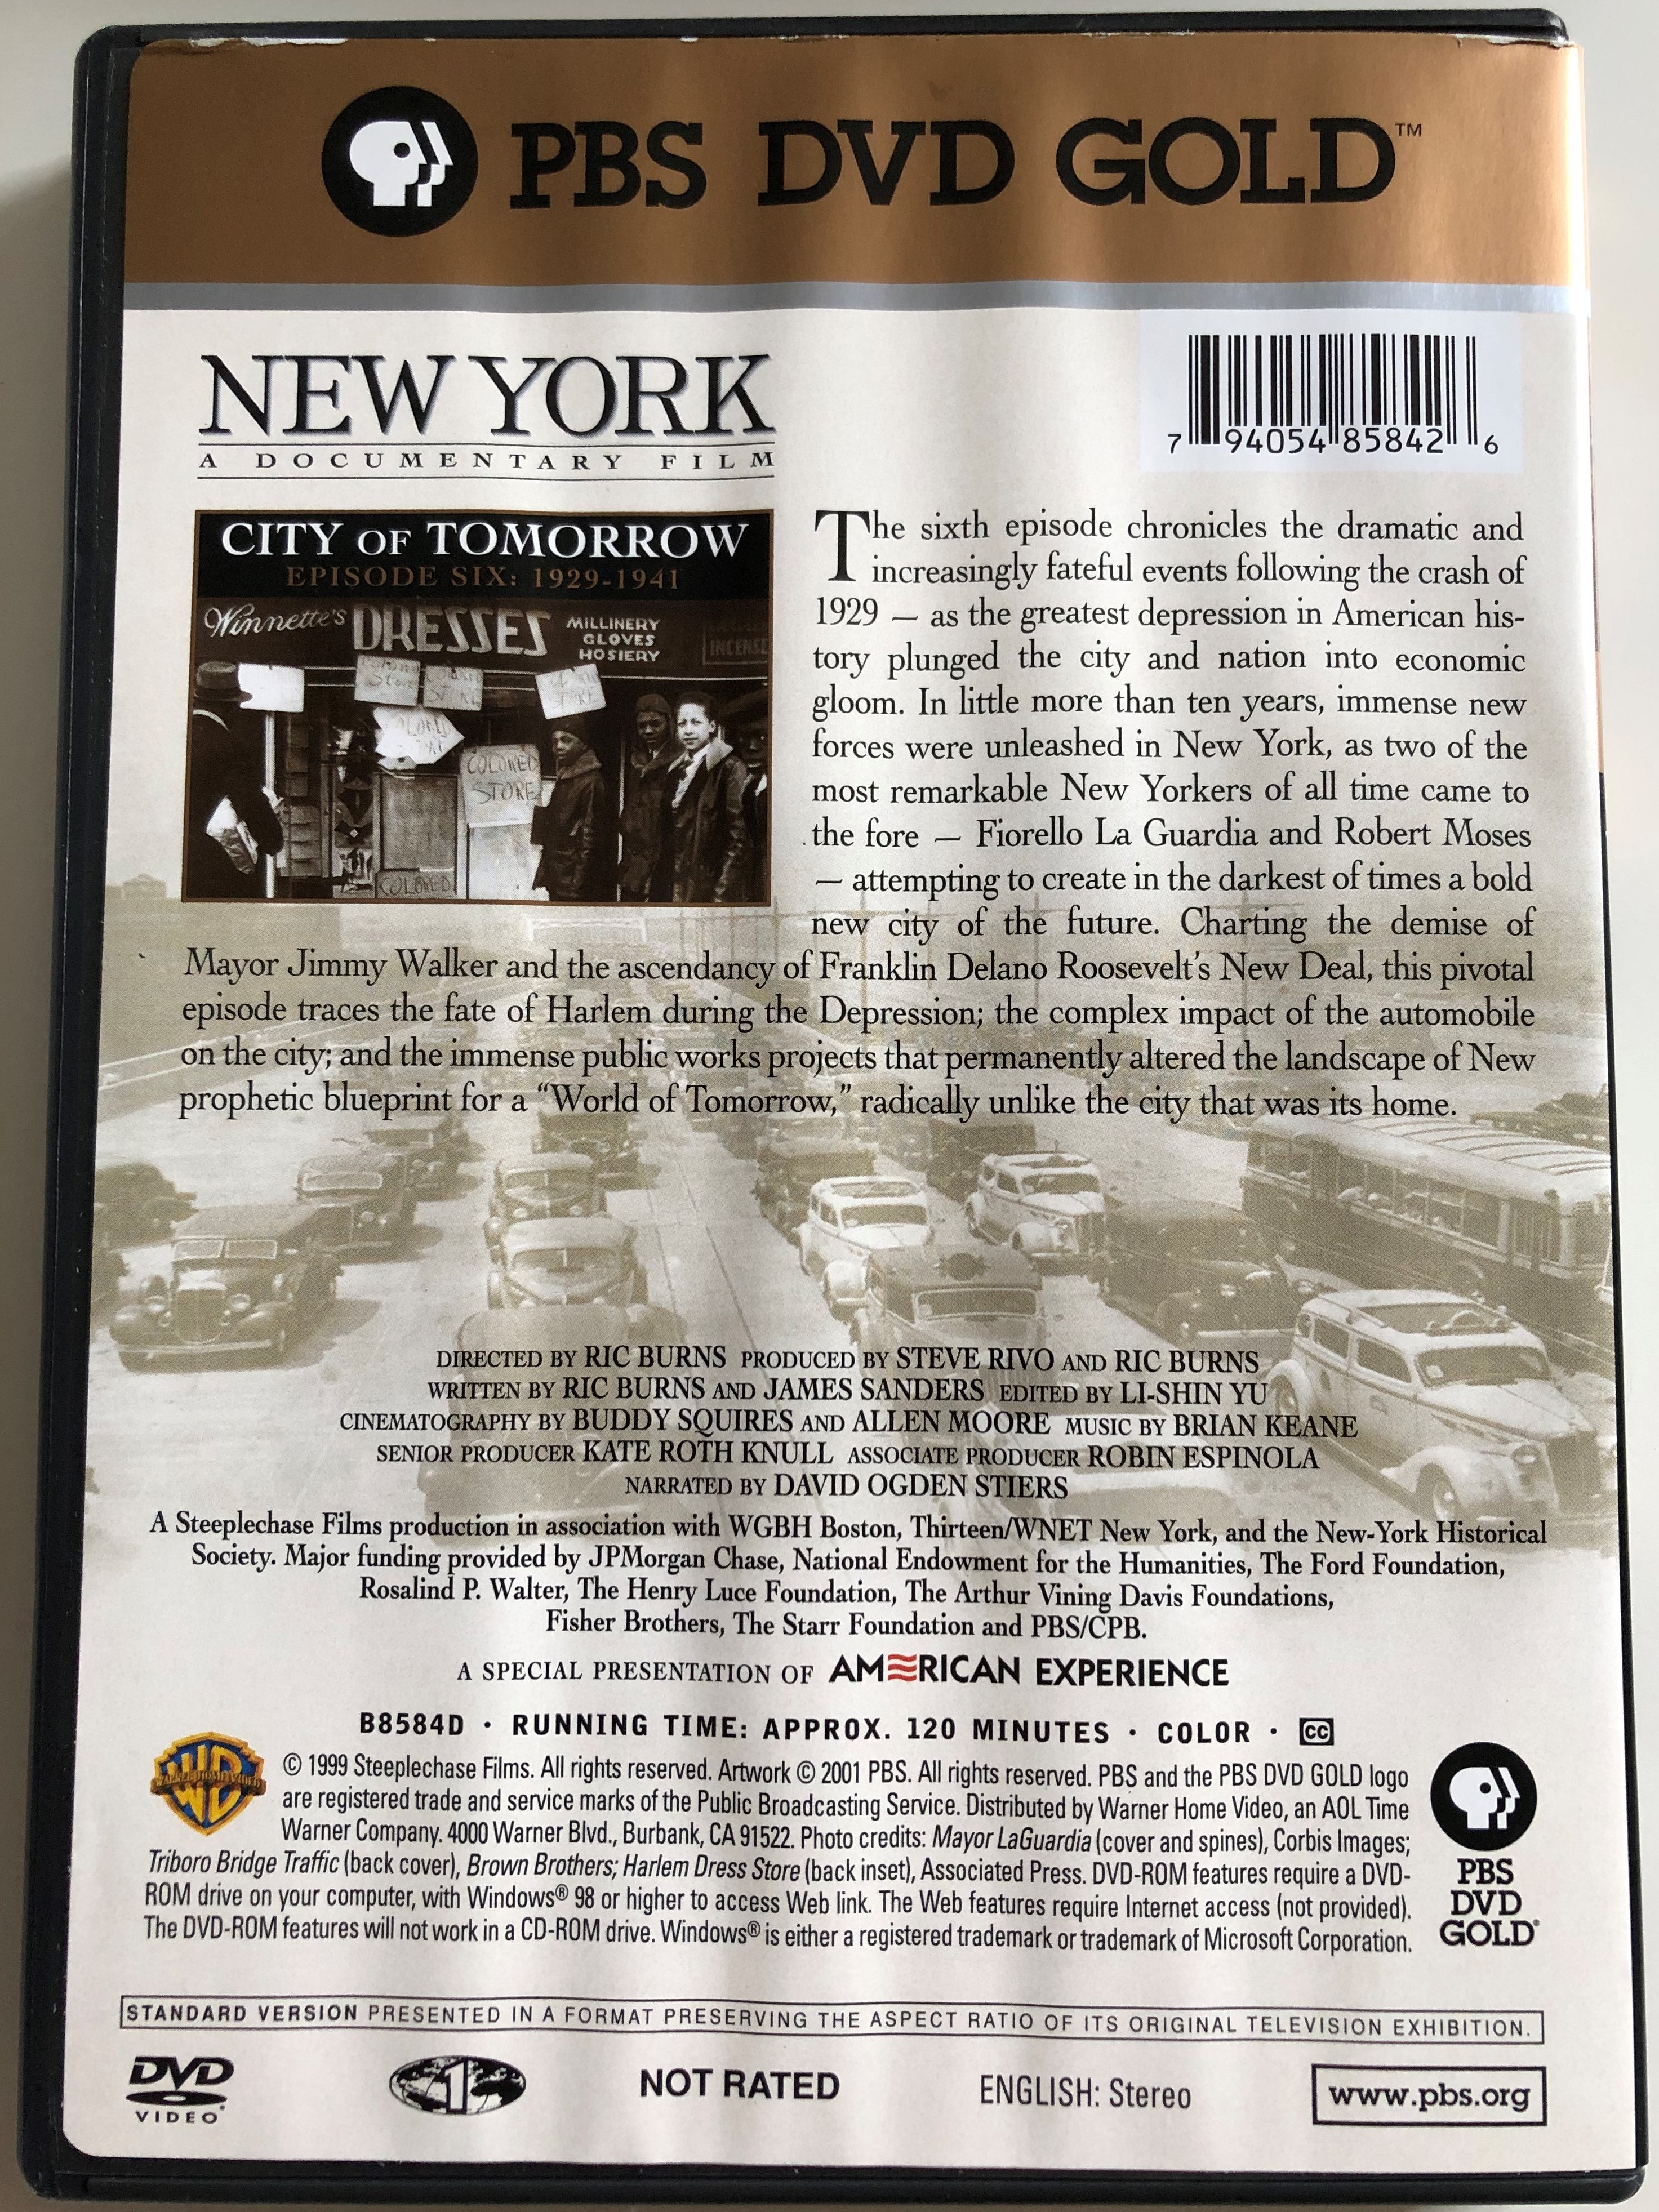 new-york-episode-6-1929-to-1941-dvd-2001-directed-by-ric-burns-3.jpg